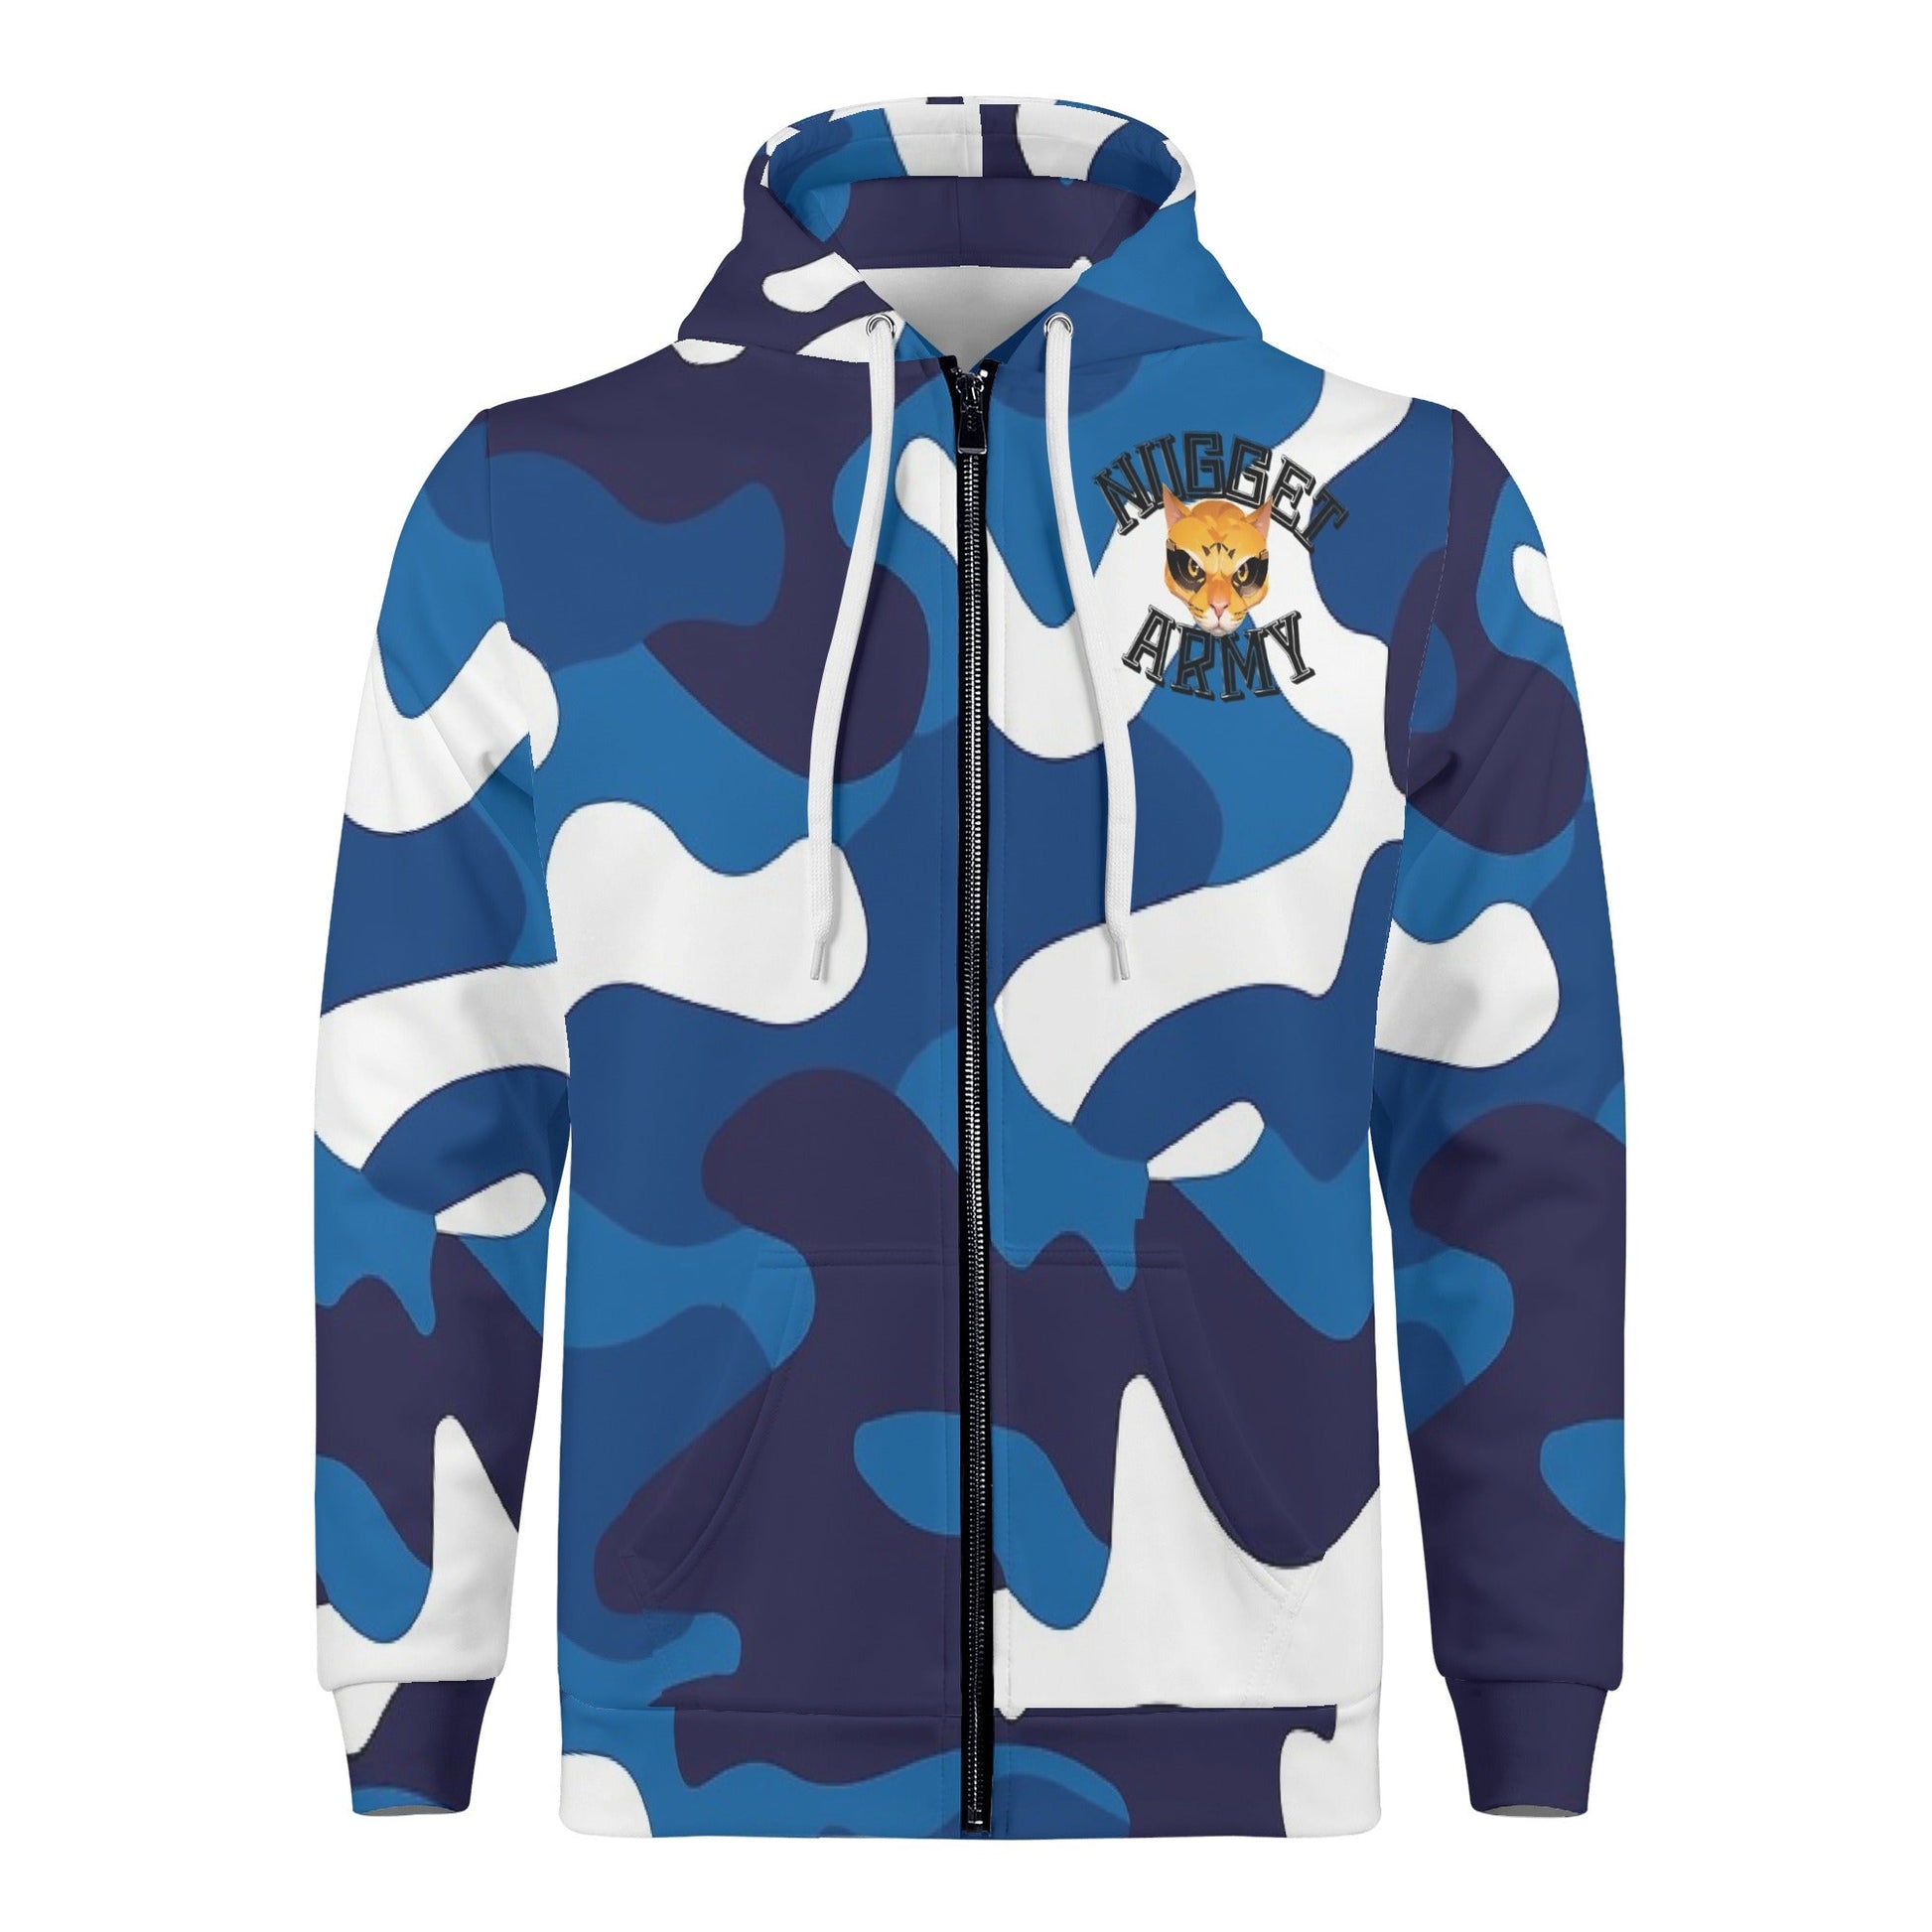 Stand out  with the  Nugget Army Police Mens Zip Up Hoodie  available at Hey Nugget. Grab yours today!